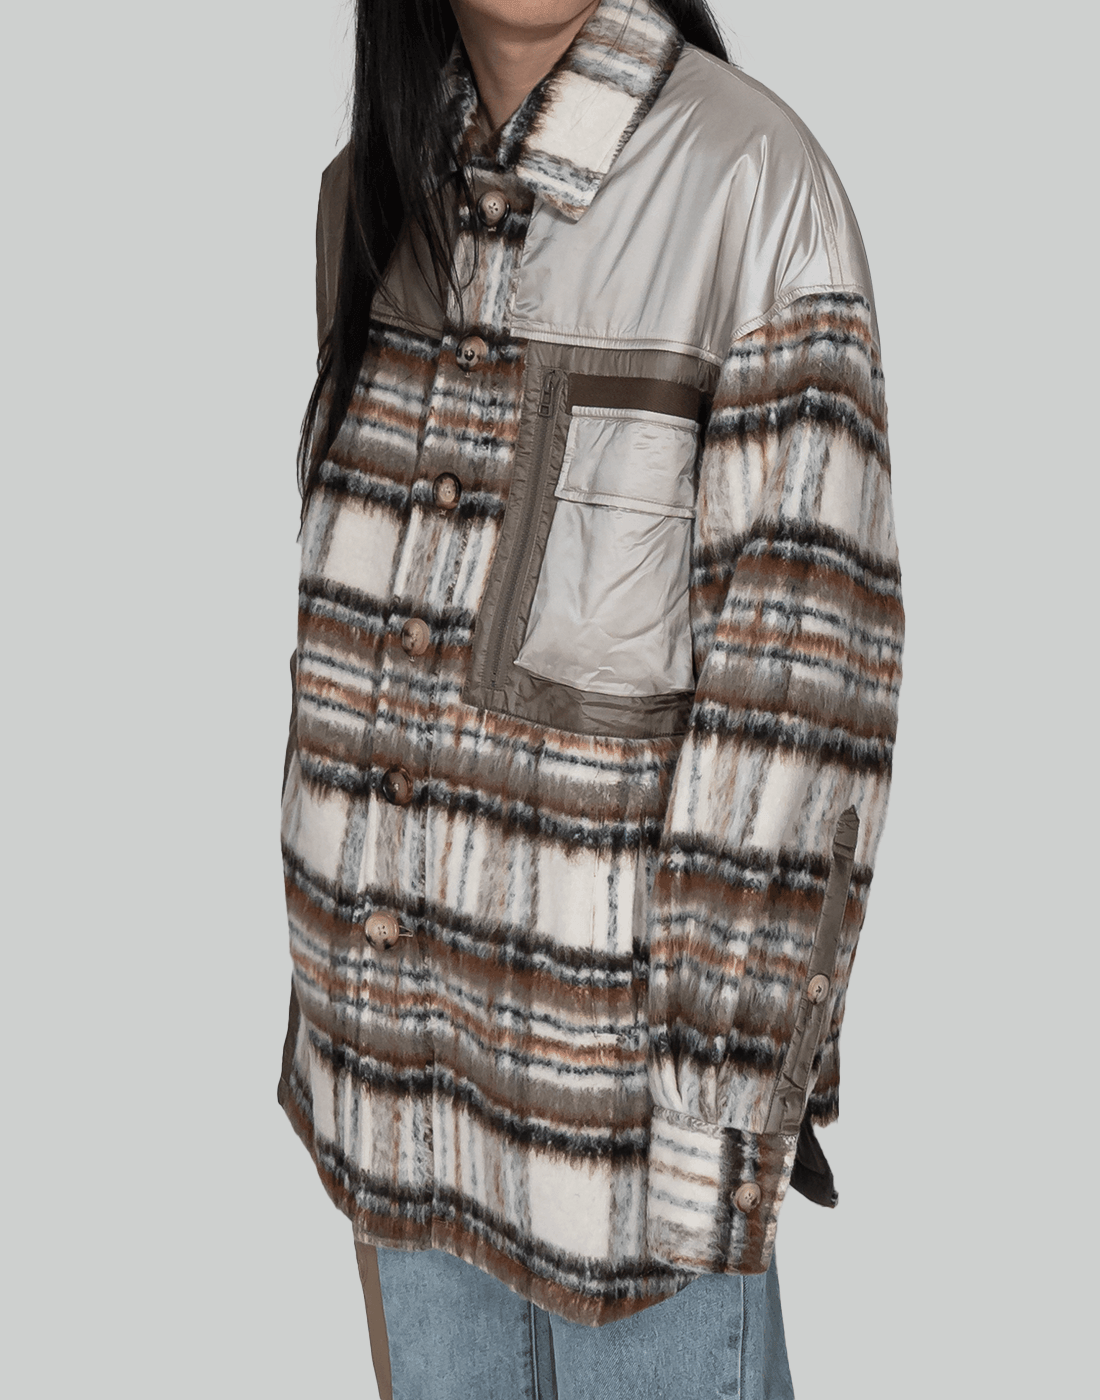 FENG CHEN WANG PANELLED FLANNEL SHIRT JACKET - 082plus